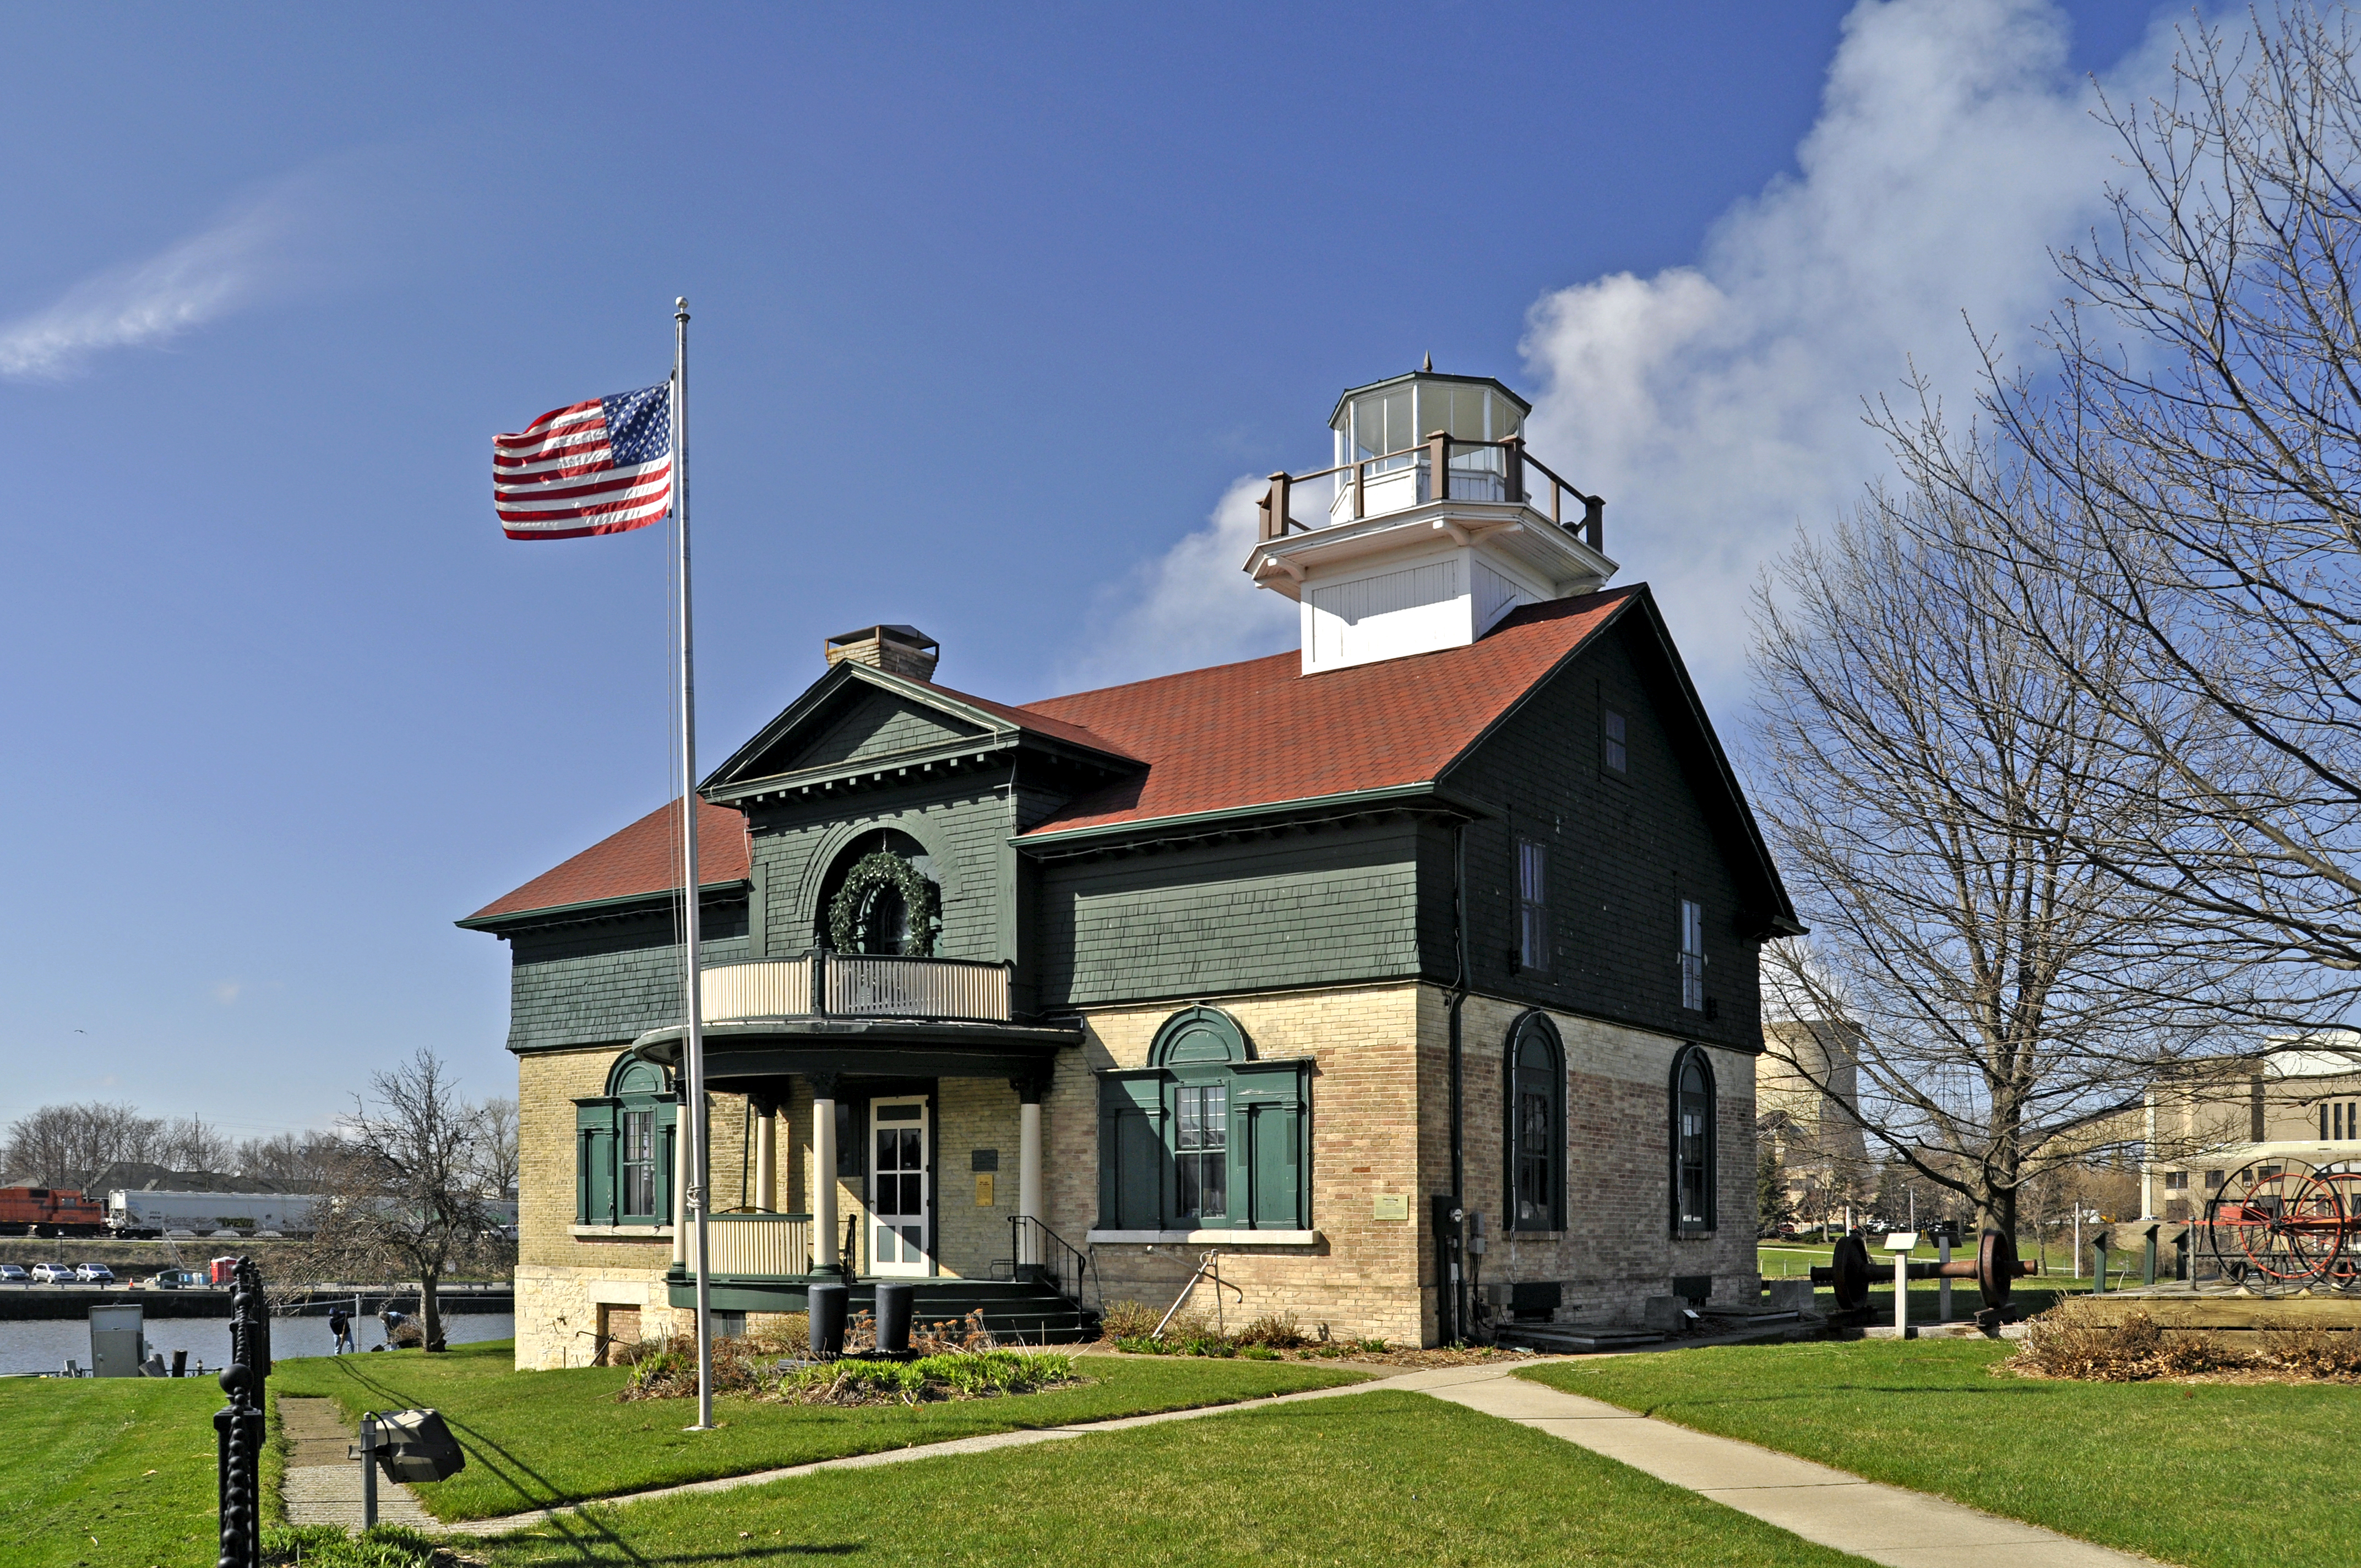 Michigan City - Old Lighthouse Museum 1858